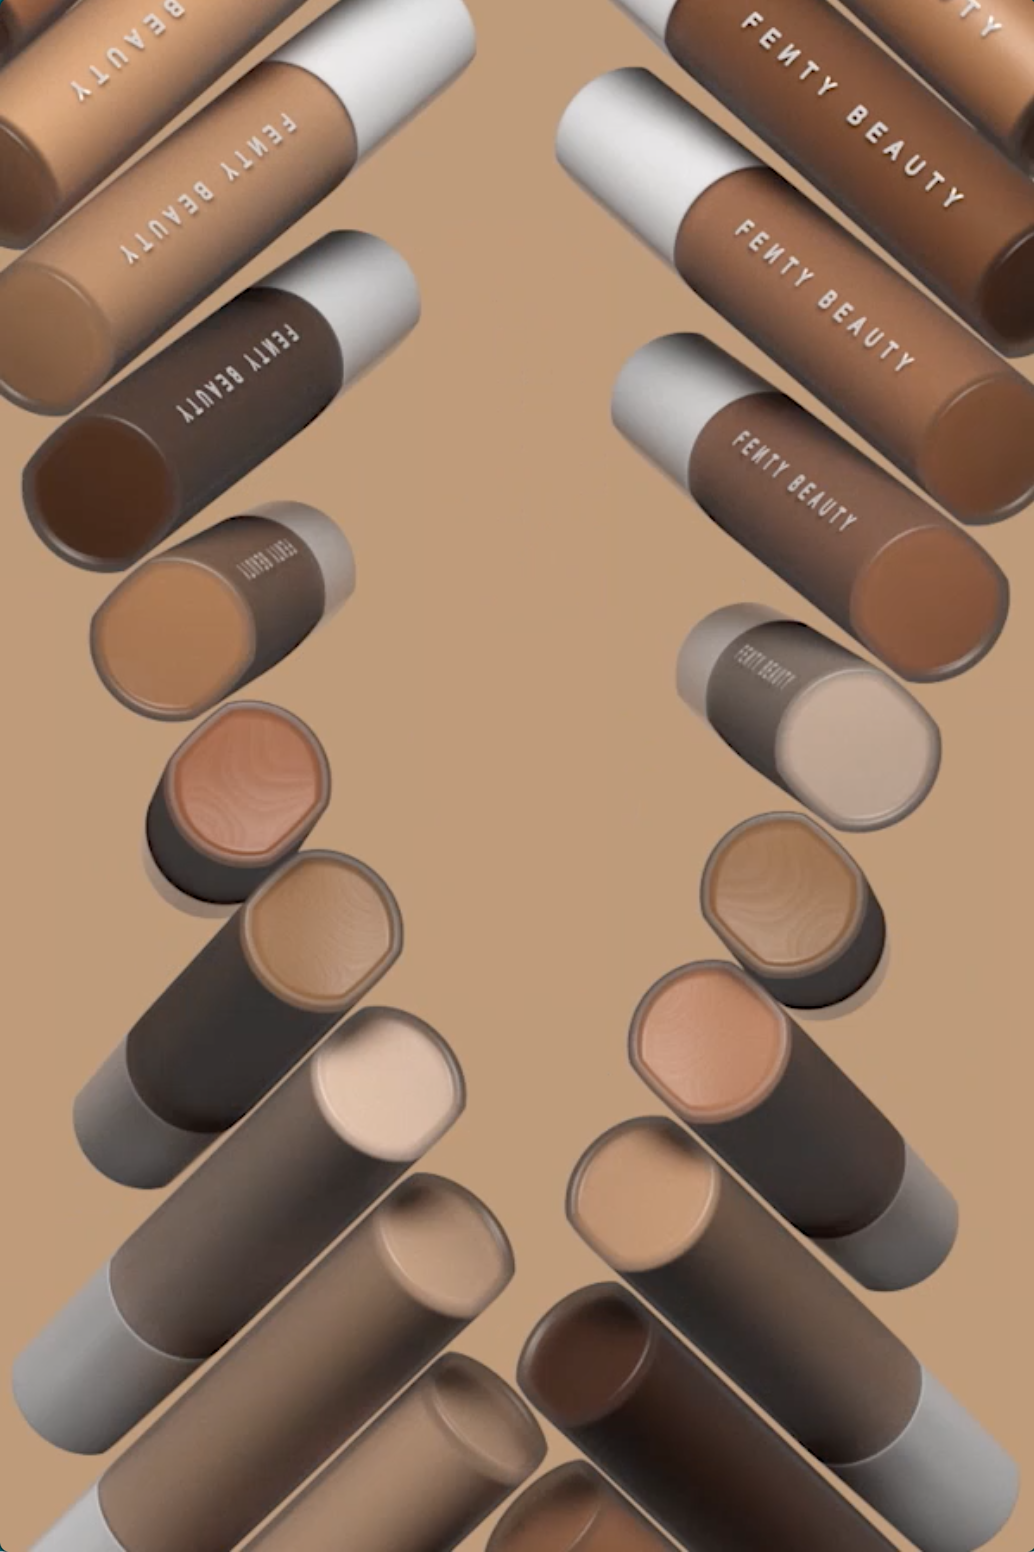 Fenty Concealer '19 V2 Video - Fenty Concealer '19 V2 Video -   11 beauty Products editorial ideas